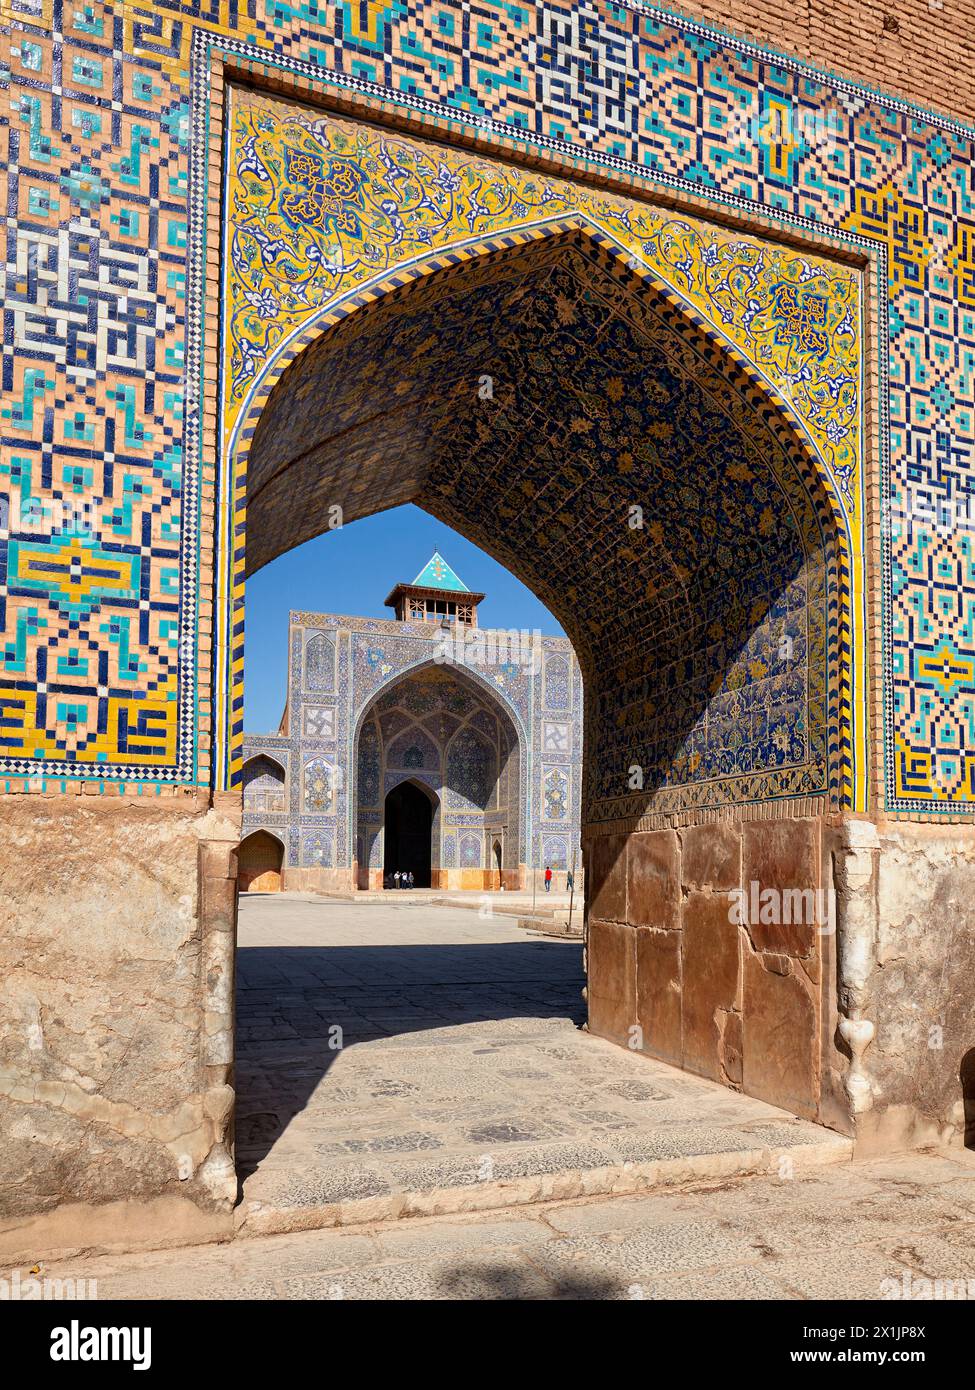 Courtyard view of the Shah Mosque (Masjed-e Shah) through an arch with elaborate tilework. Isfahan, Iran. Stock Photo